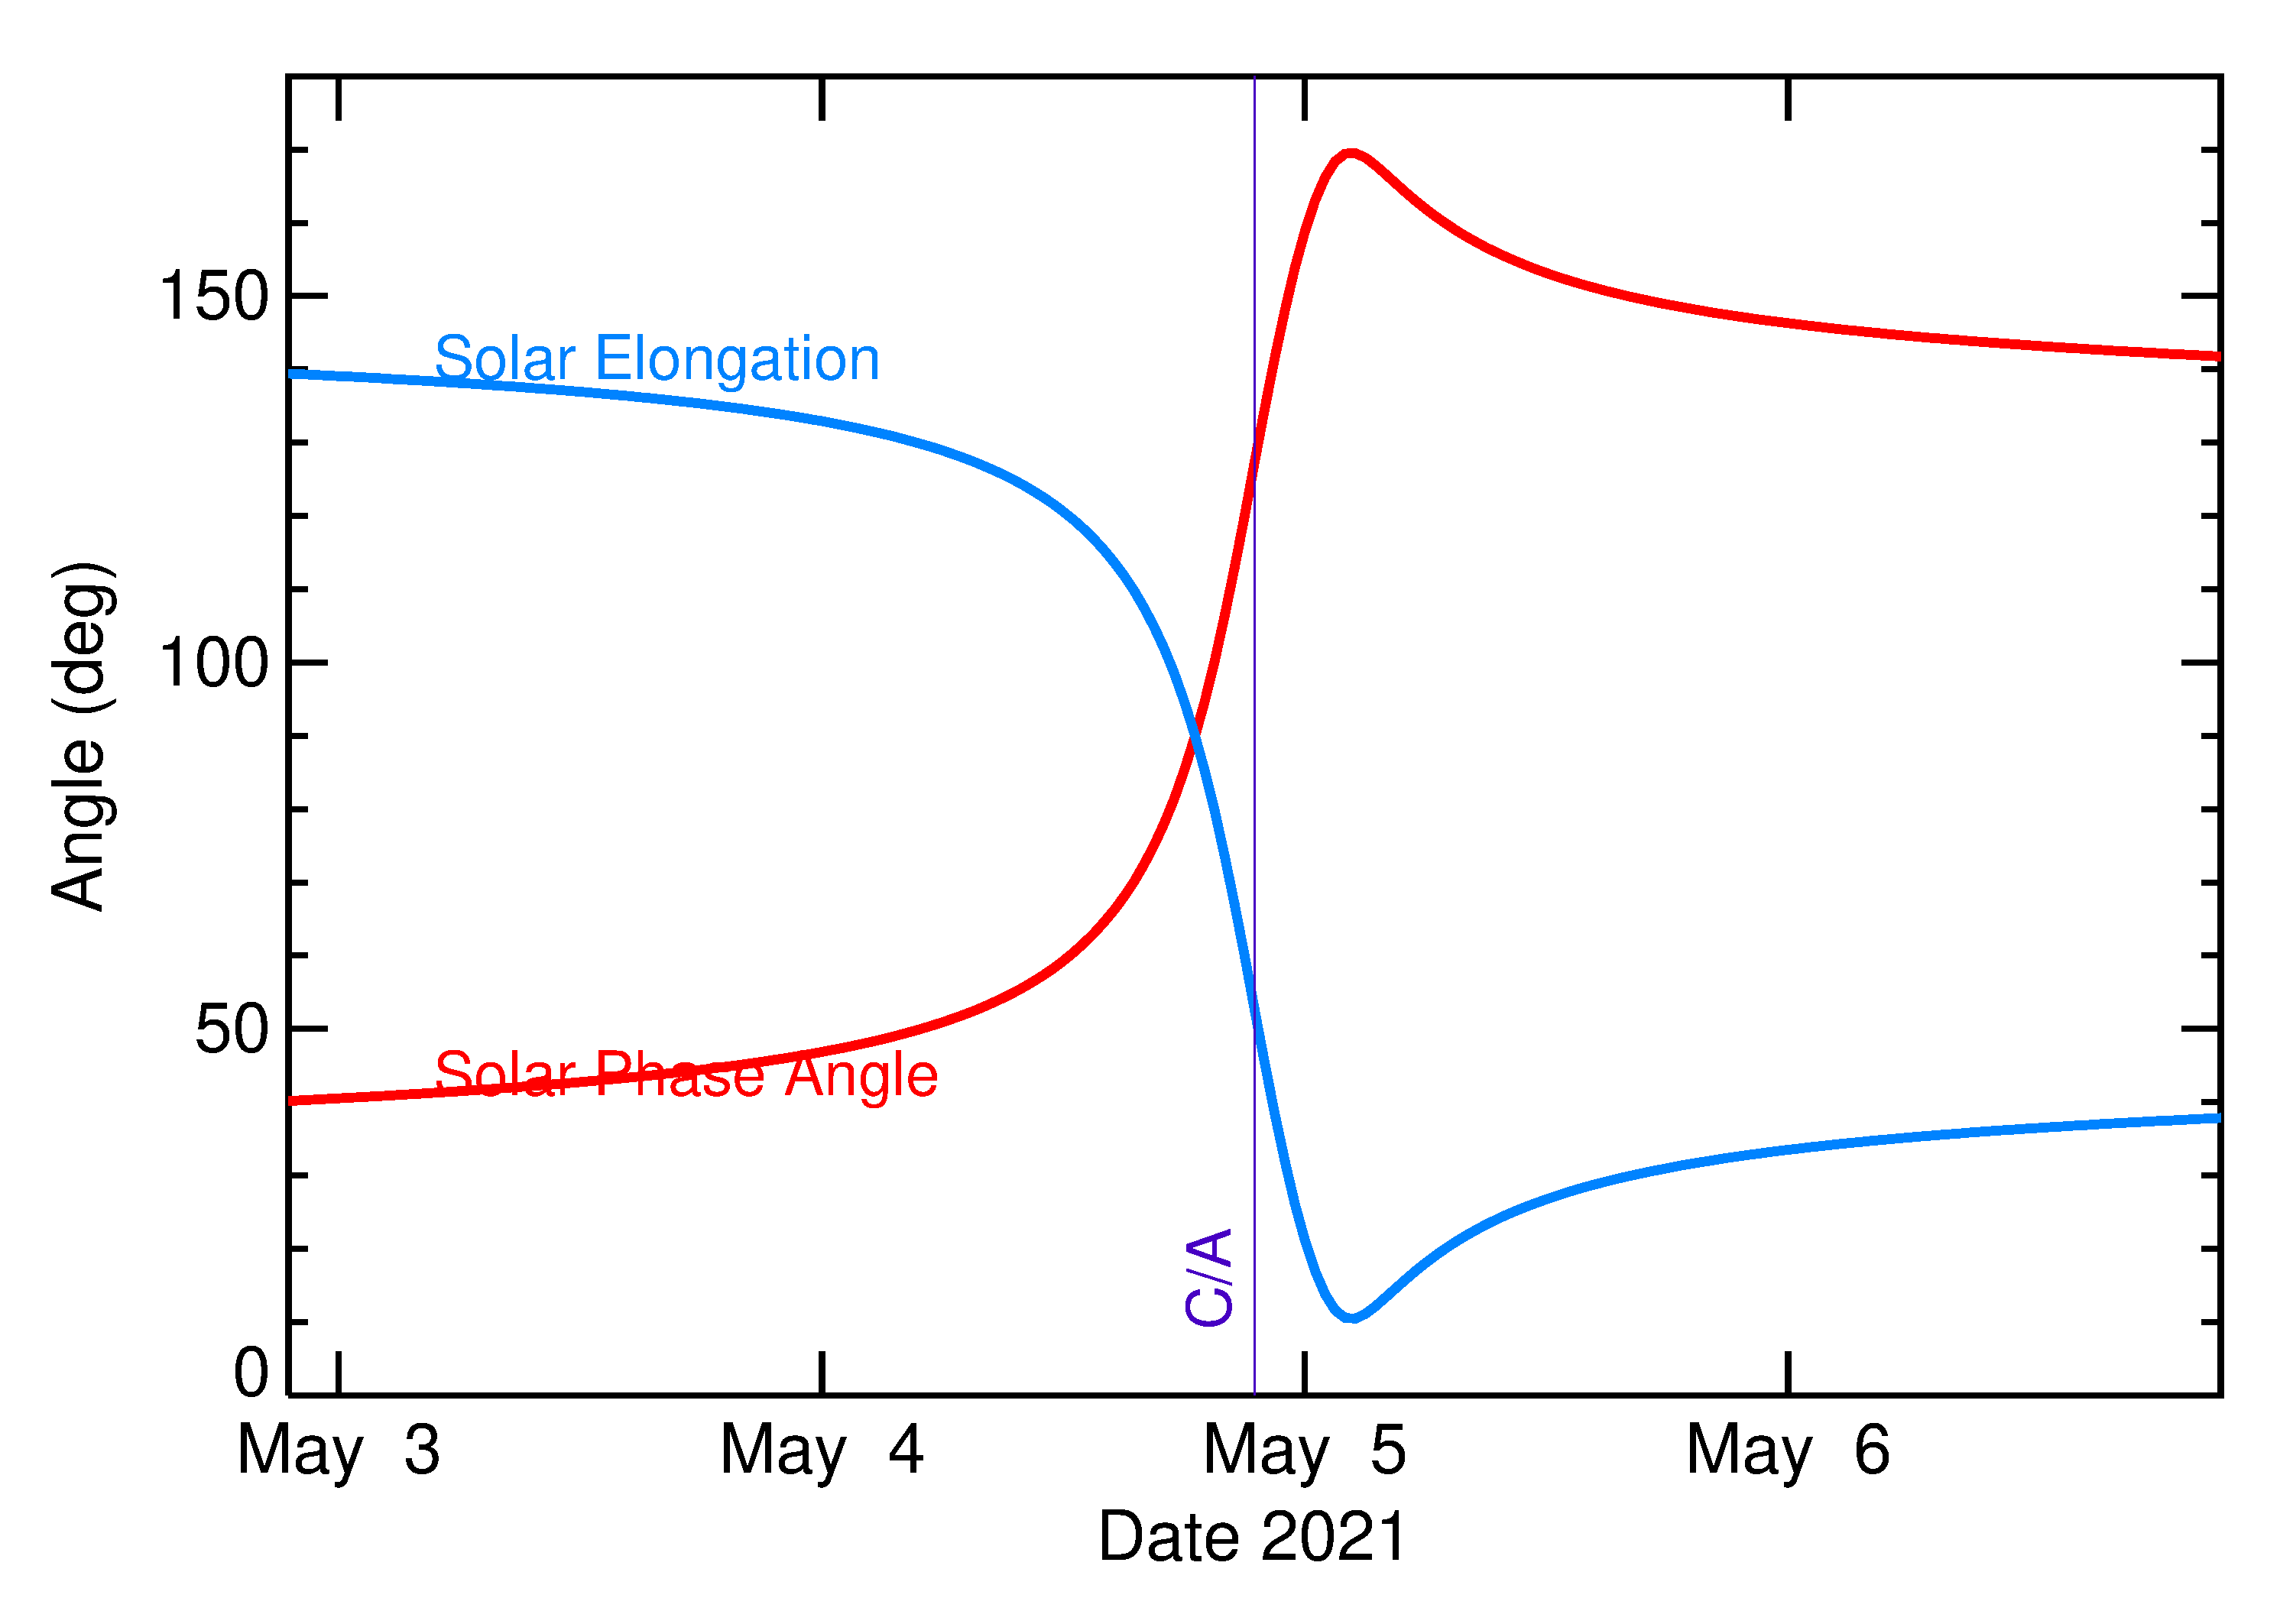 Solar Elongation and Solar Phase Angle of 2021 JV in the days around closest approach